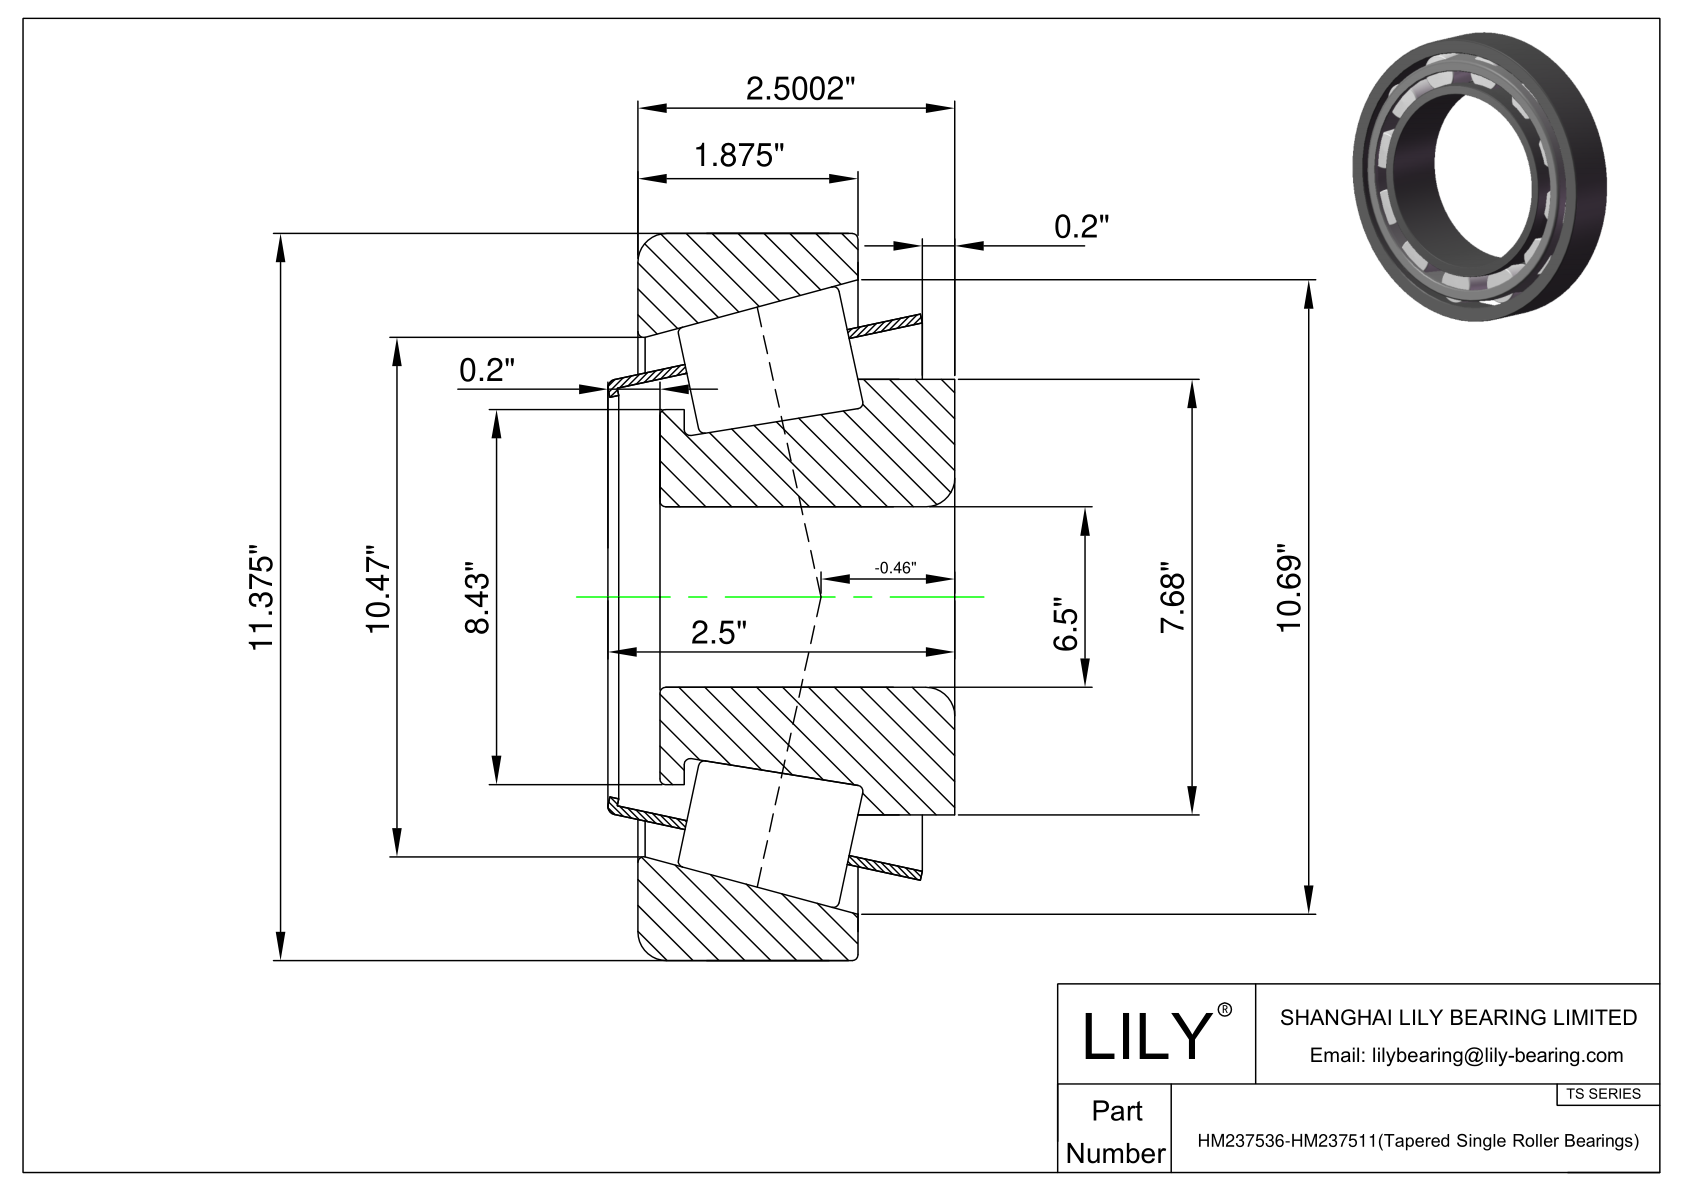 HM237536-HM237511 TS (Tapered Single Roller Bearings) (Imperial) cad drawing